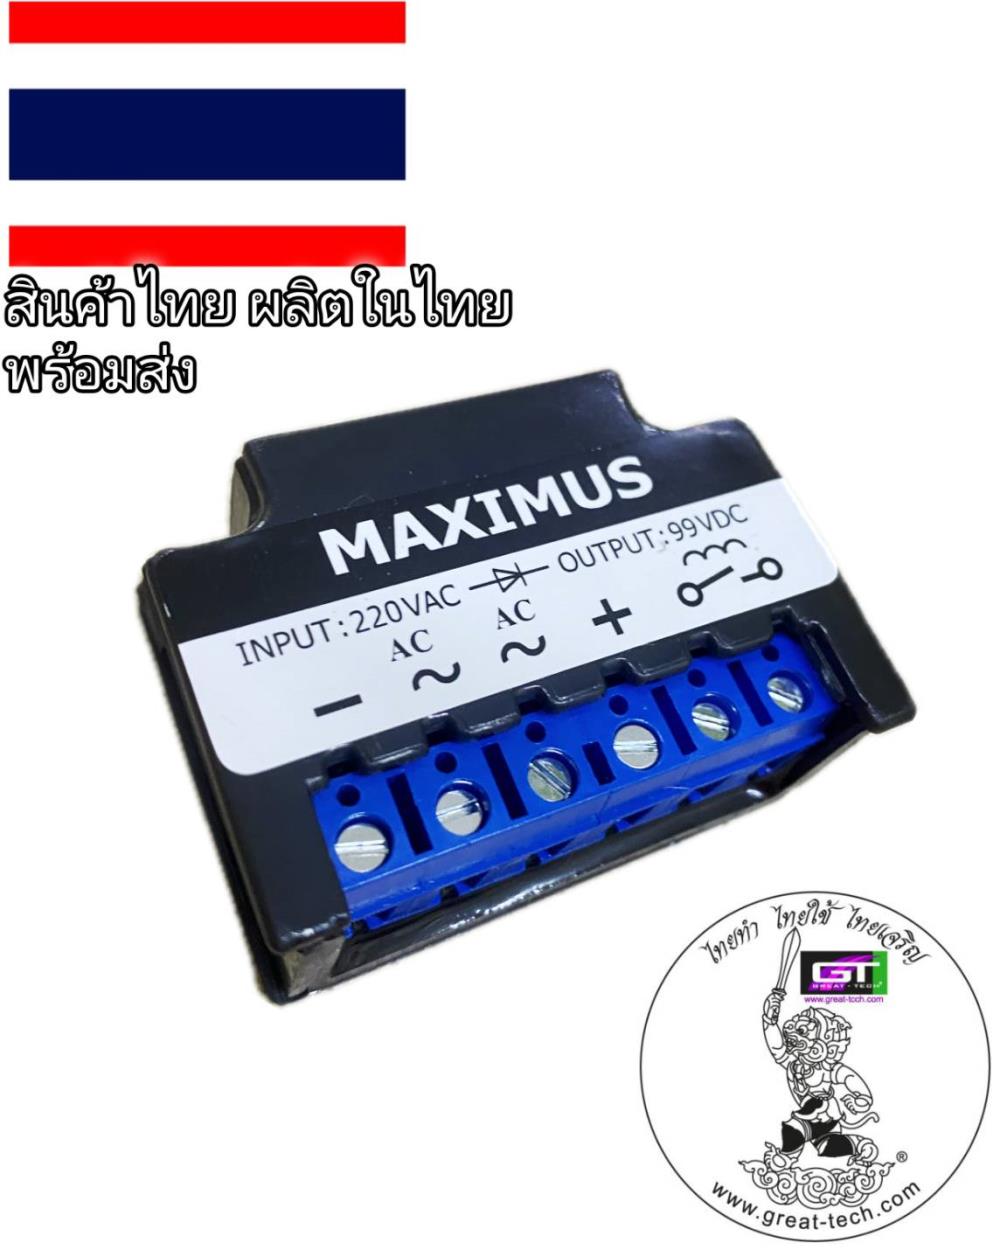 MAXMUS ,#เบรคเรคติไฟเออร์#รับซ่อมคอยล์เบรกไฟฟ้า&จำหน่ายเบรกไฟฟ้าและRectifier #BRAKE RECTIFIER#OVER LOAD RELAY,,Electrical and Power Generation/Electrical Components/Rectifiers